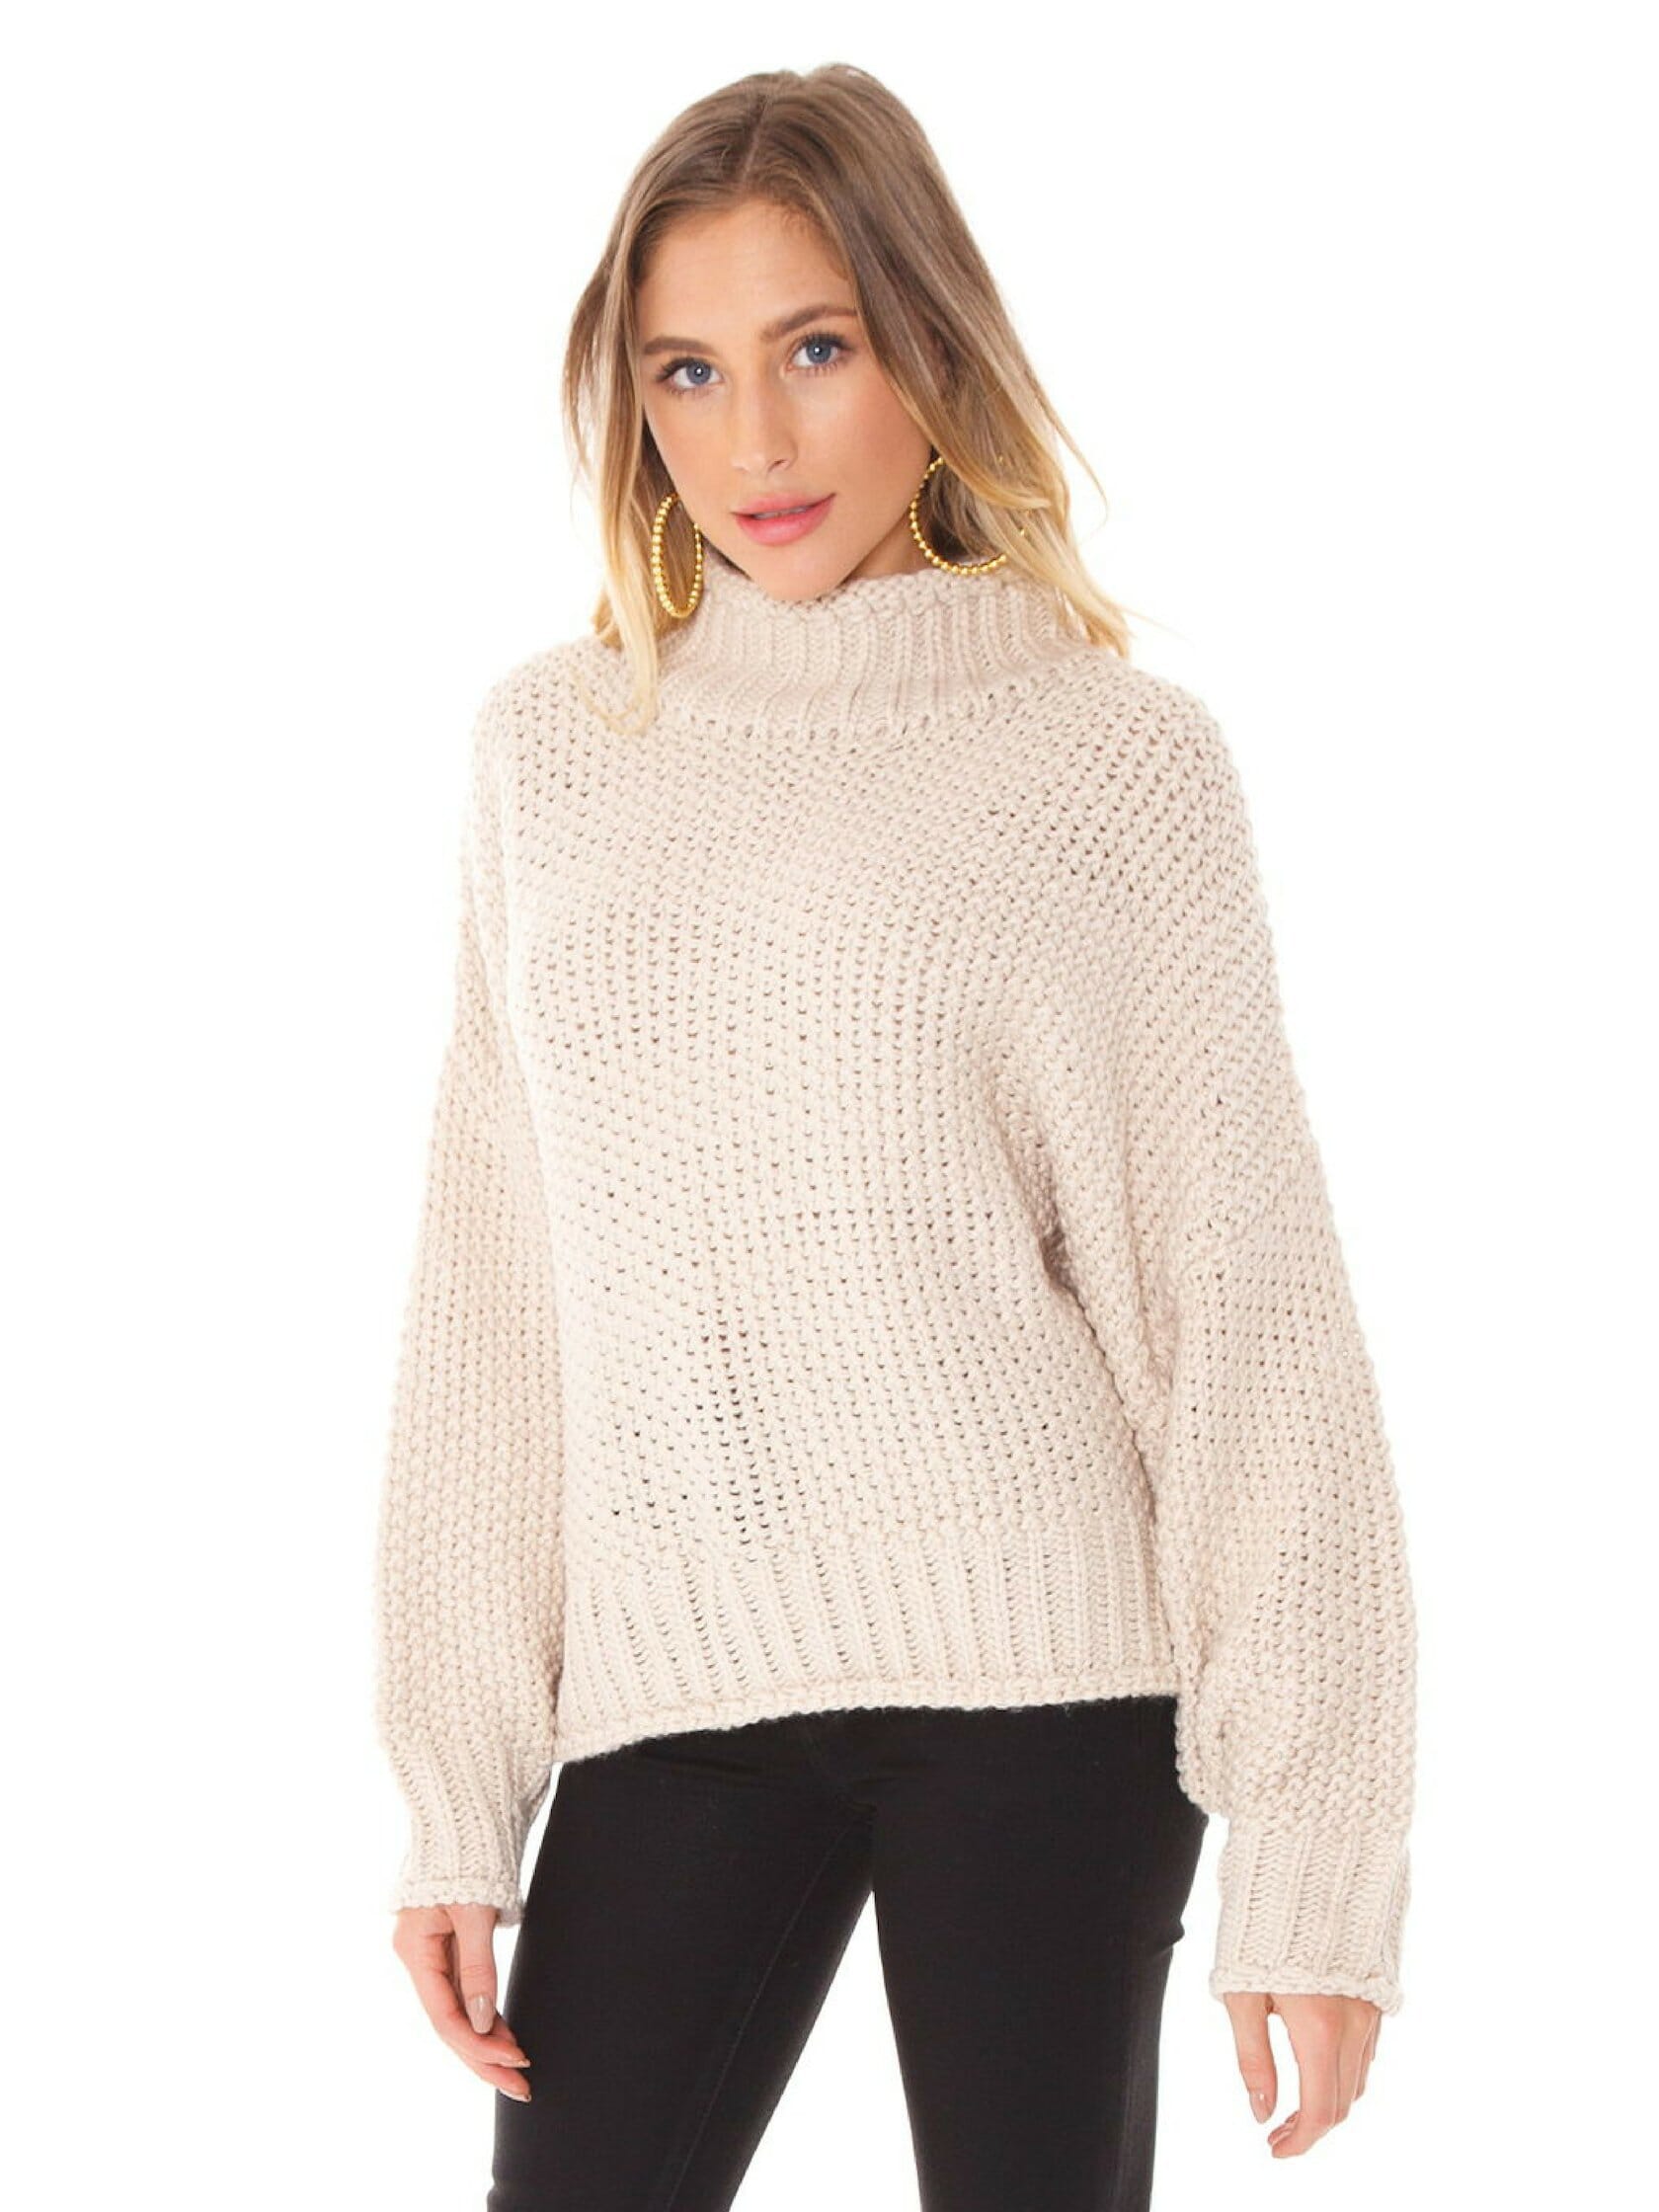 FashionPass Lily Turtleneck Sweater in Natural